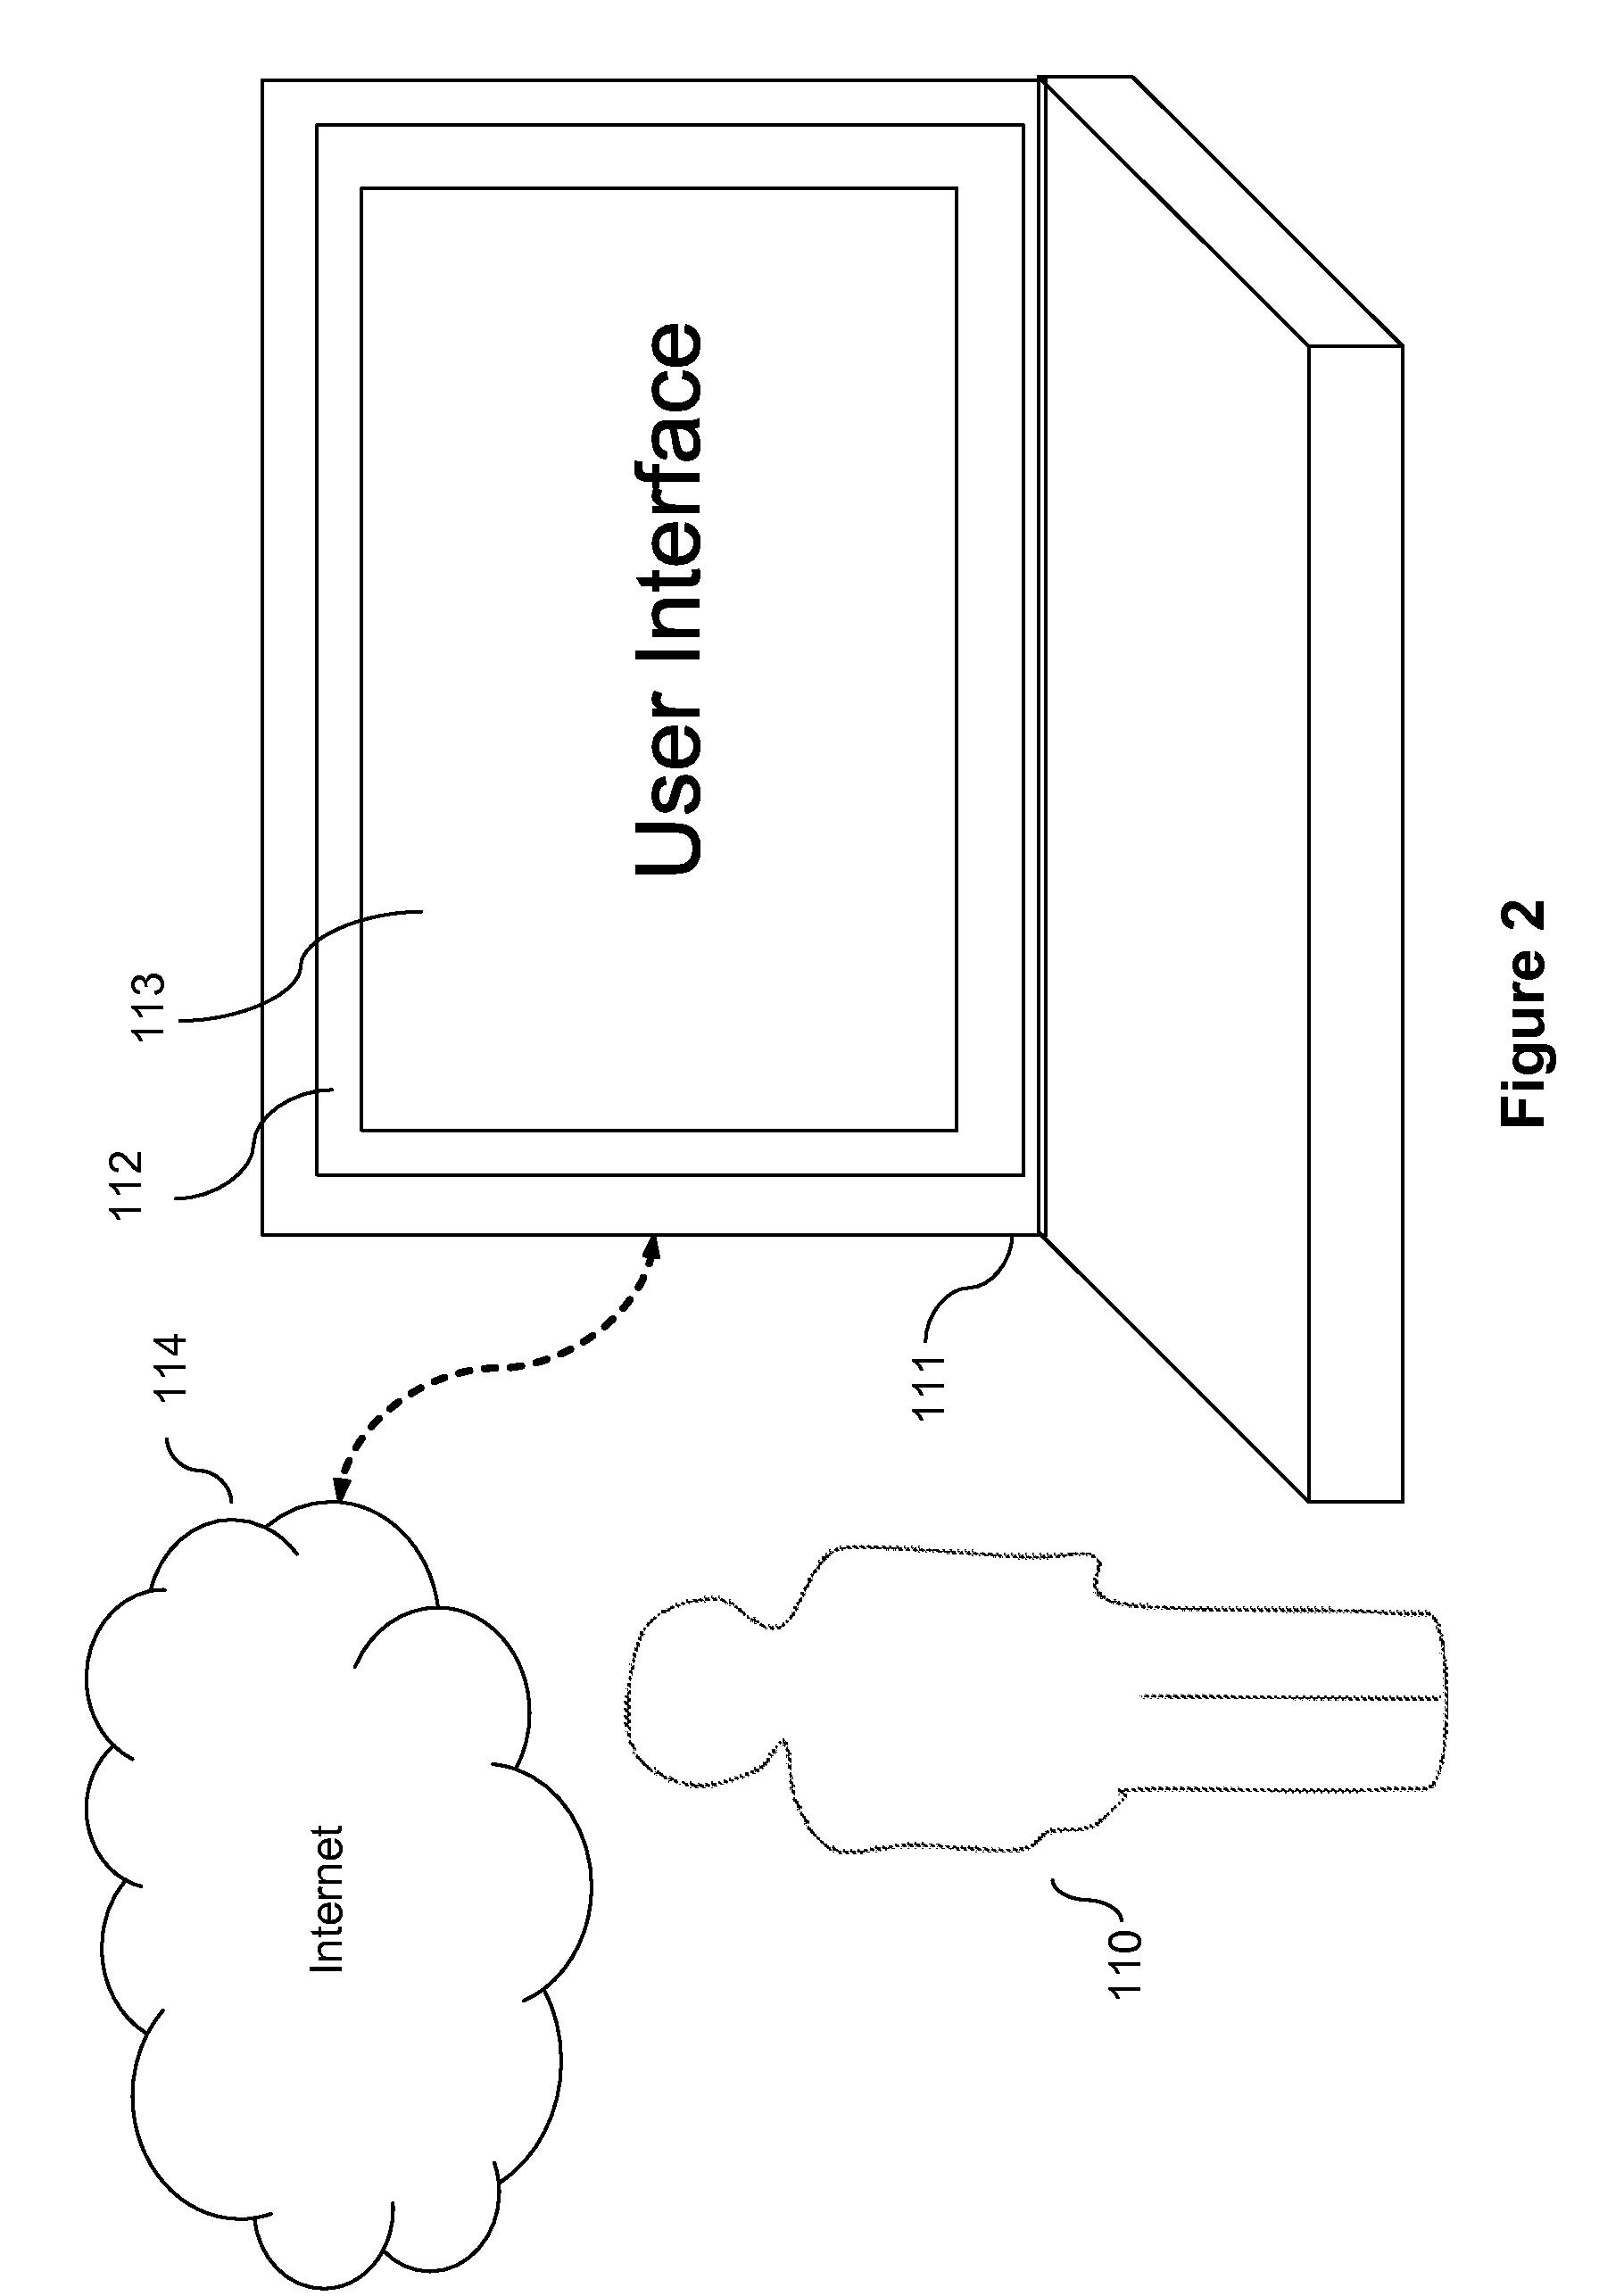 System and Method of Facilitating Project Management with User Interface